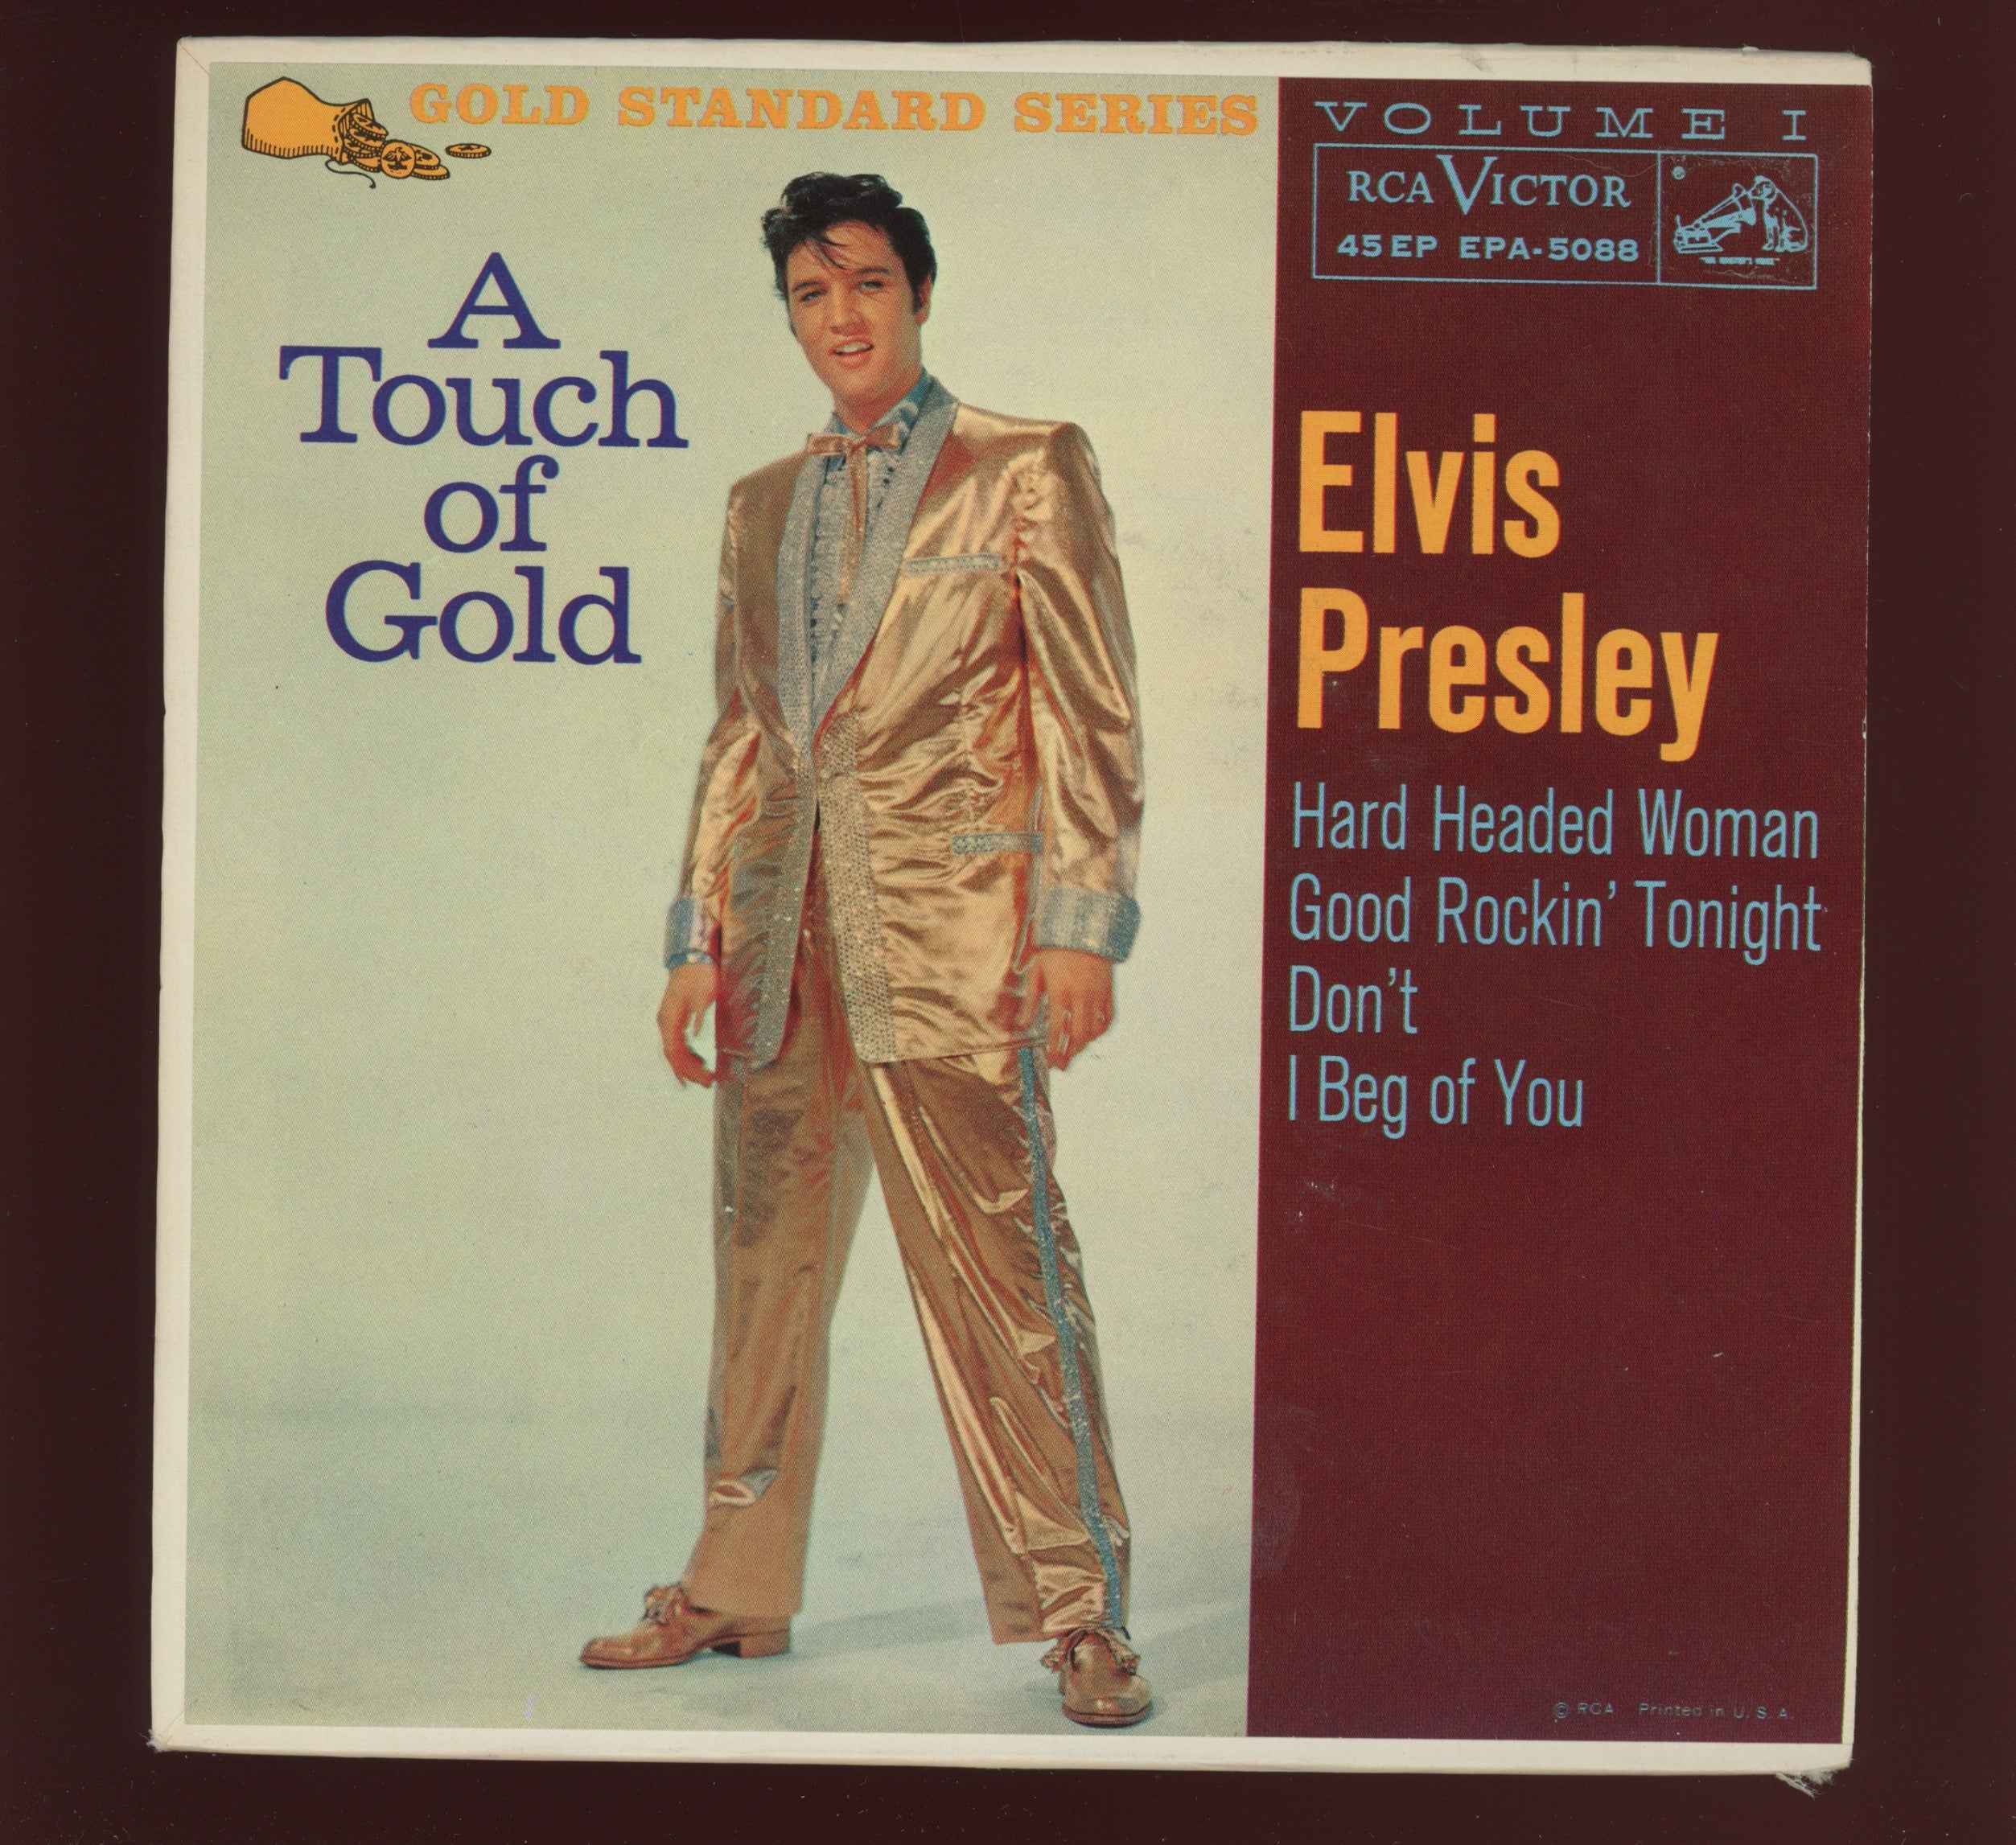 Elvis Presley - A Touch Of Gold Volume I on RCA EPA 5088 Rare Orange Label EP 45 With Cover